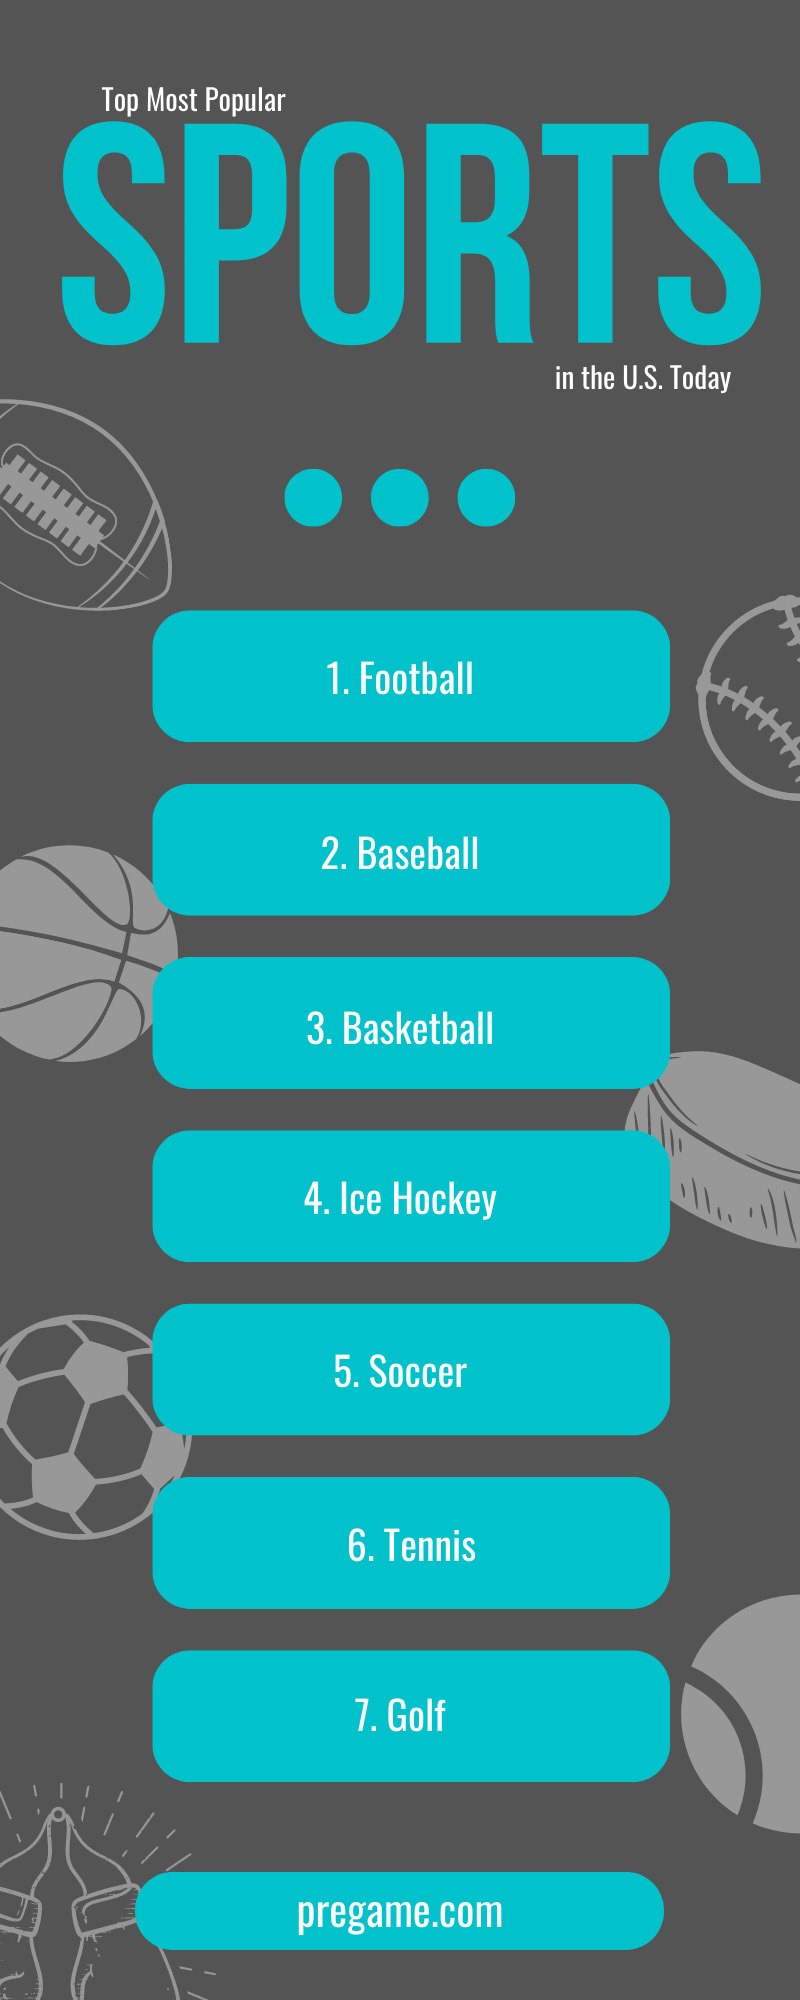 Top 10 Most Popular Sports in the U.S. Today